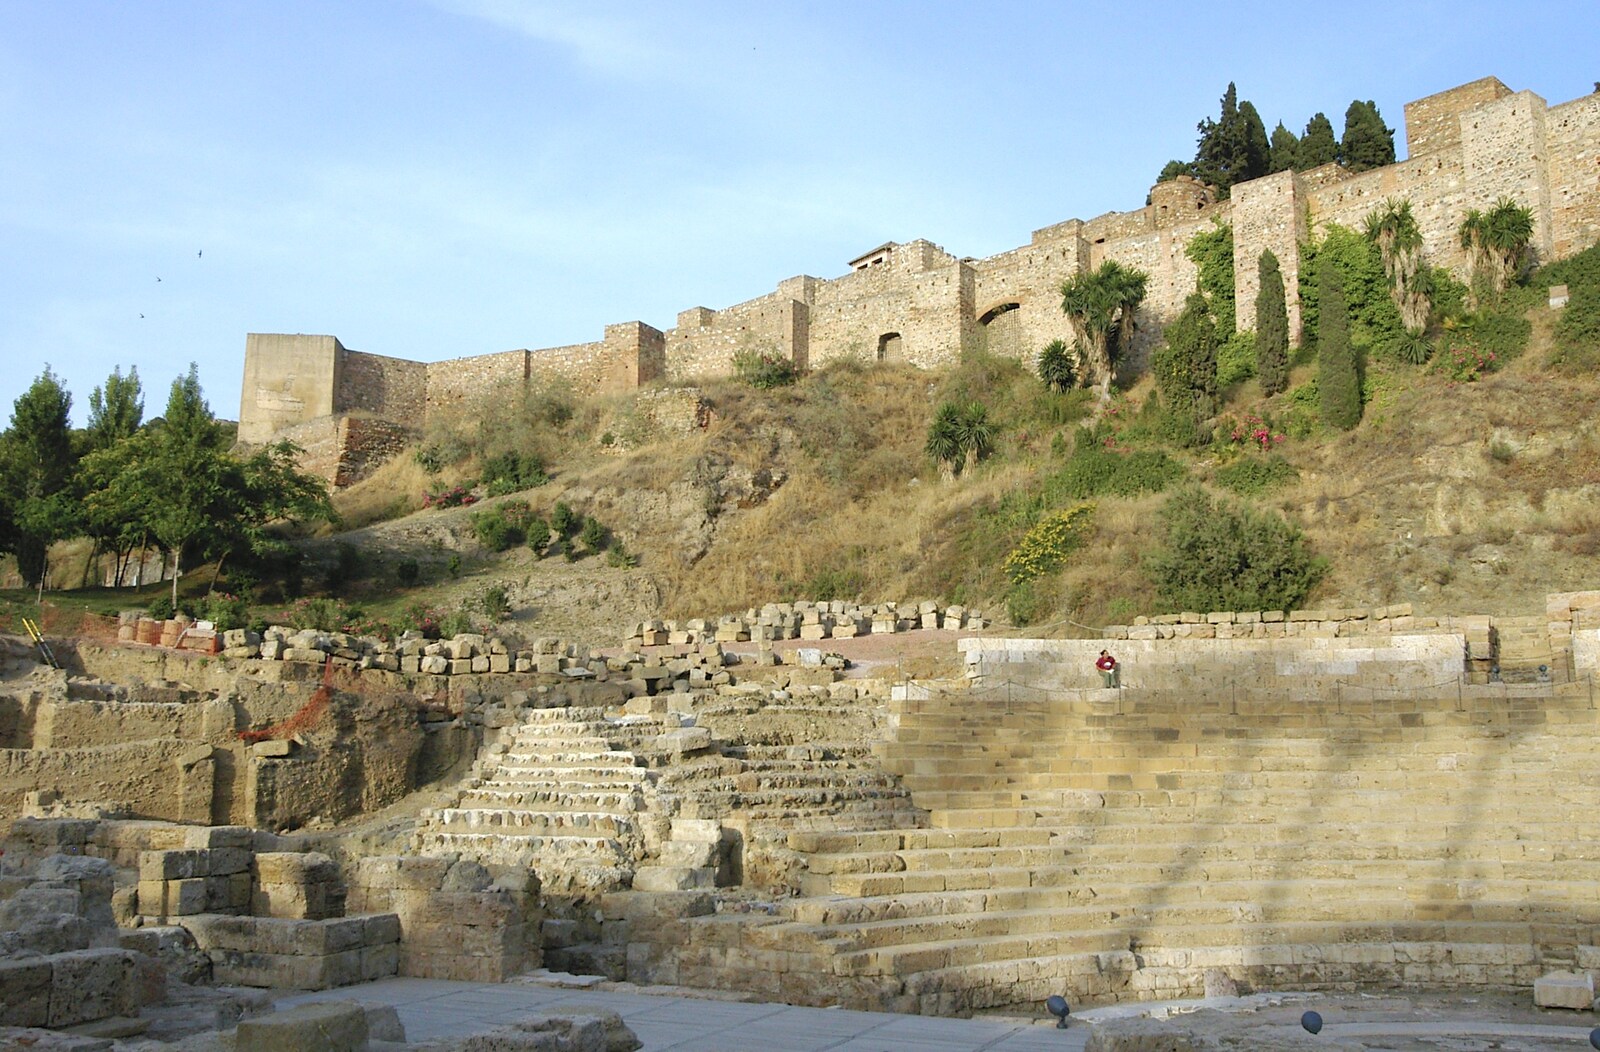 A solitary figure sits in the Roman ampitheatre from Working at Telefónica, Malaga, Spain - 6th June 2006